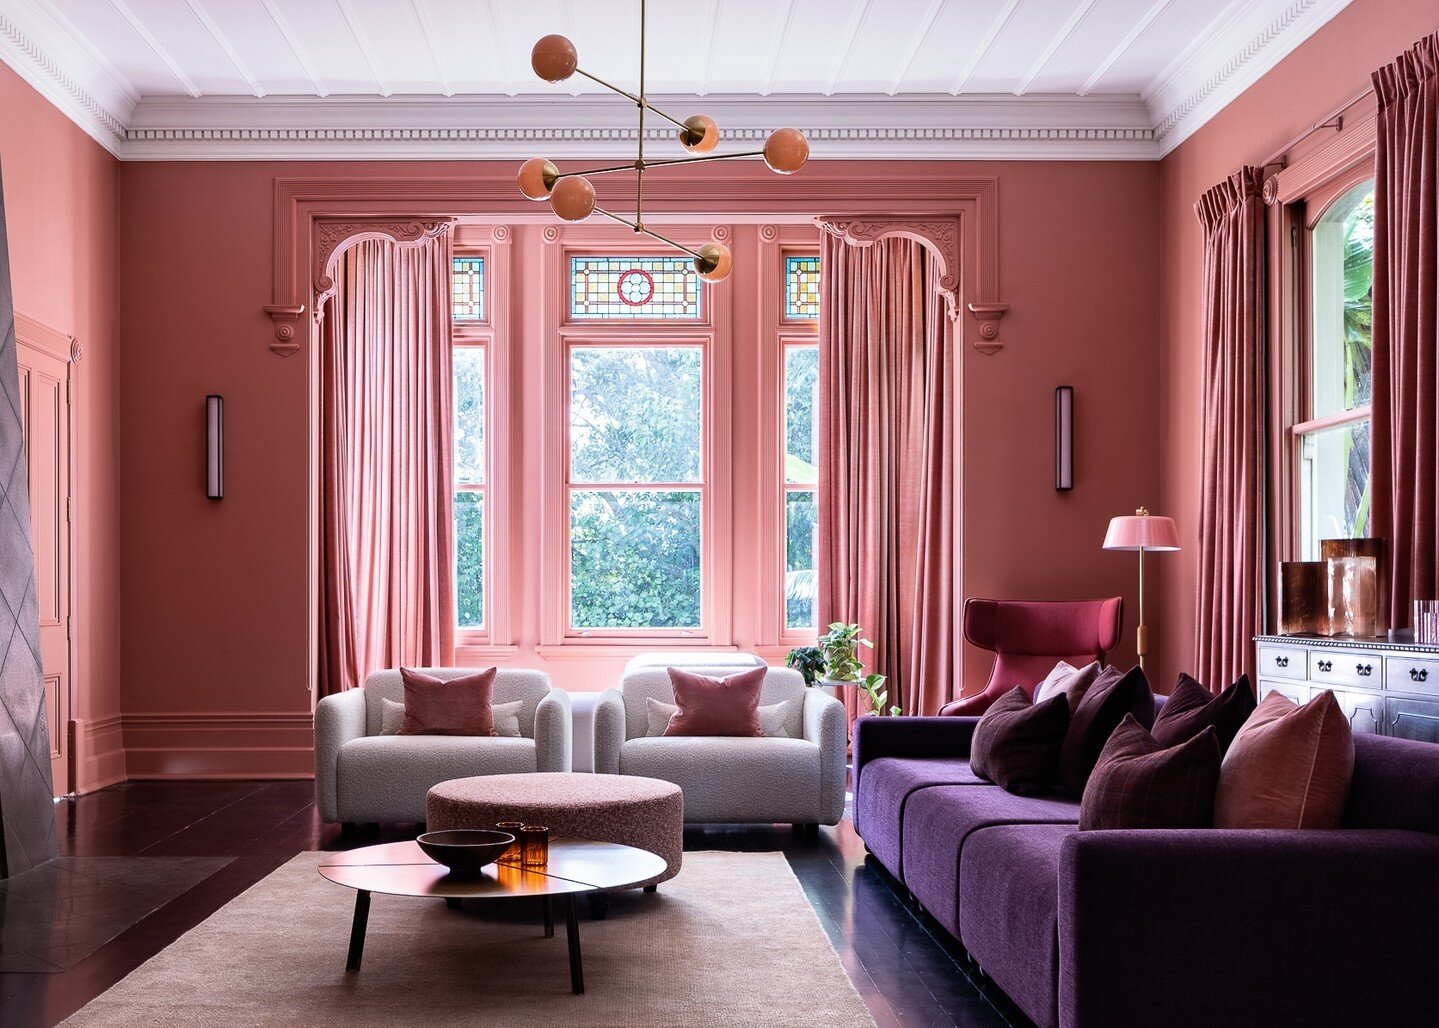 A unique, fearless response to their client's brief and love of colour, @at.space_nz have masterfully combined hues of dirty pink, purple and aubergine to transform a once monochromatic space into an intimate, cosy family lounge. ⁠
⁠
A finalist in th